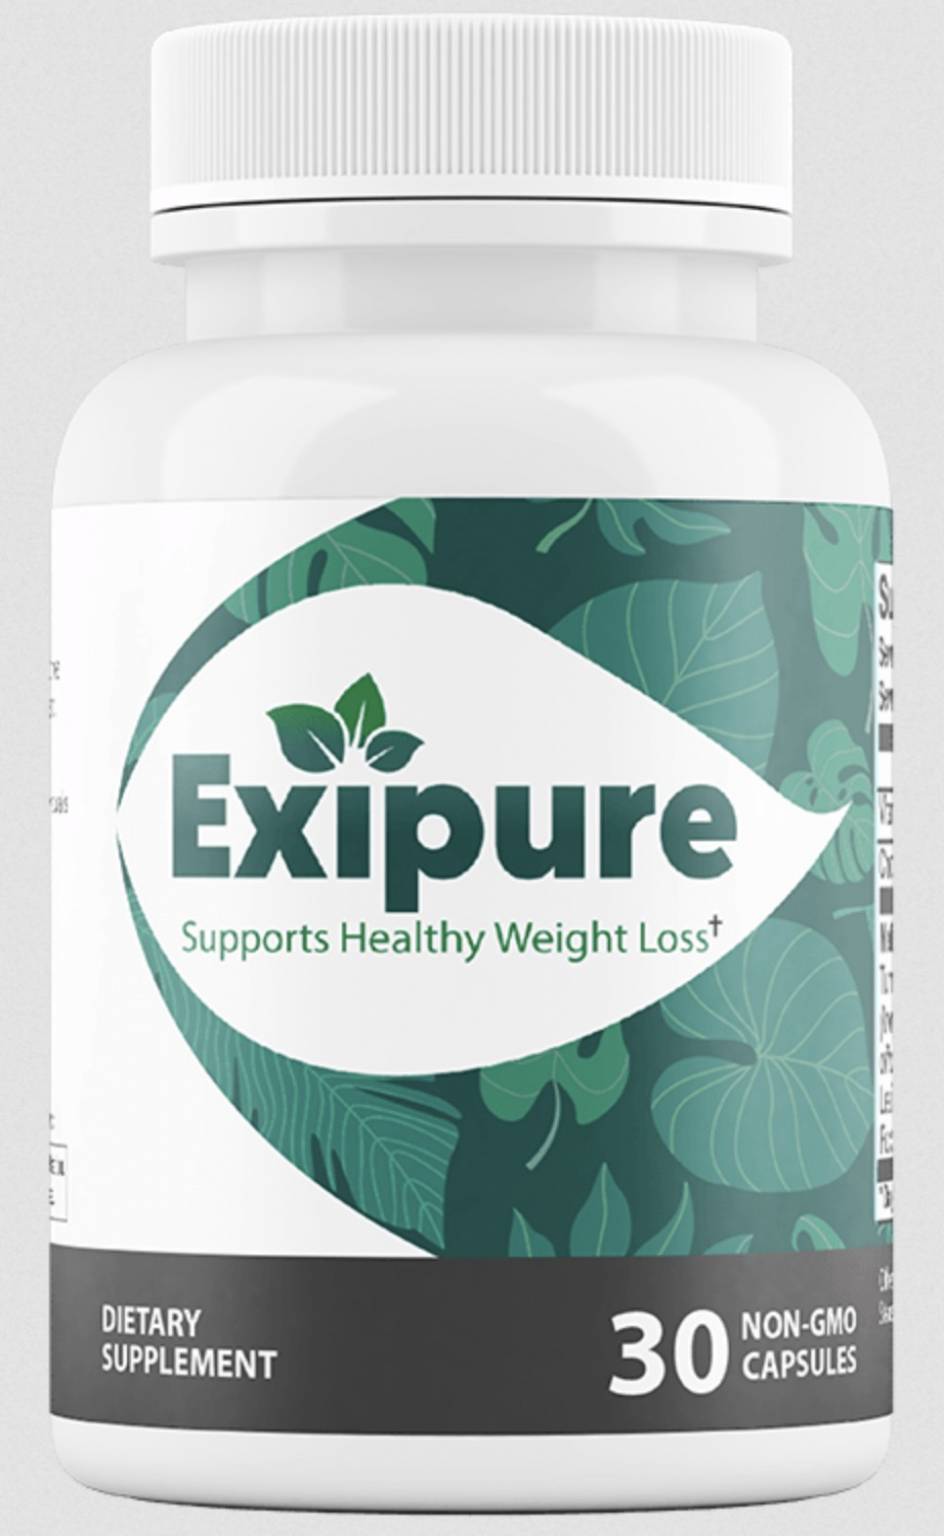 what are the ingredients in Exipure